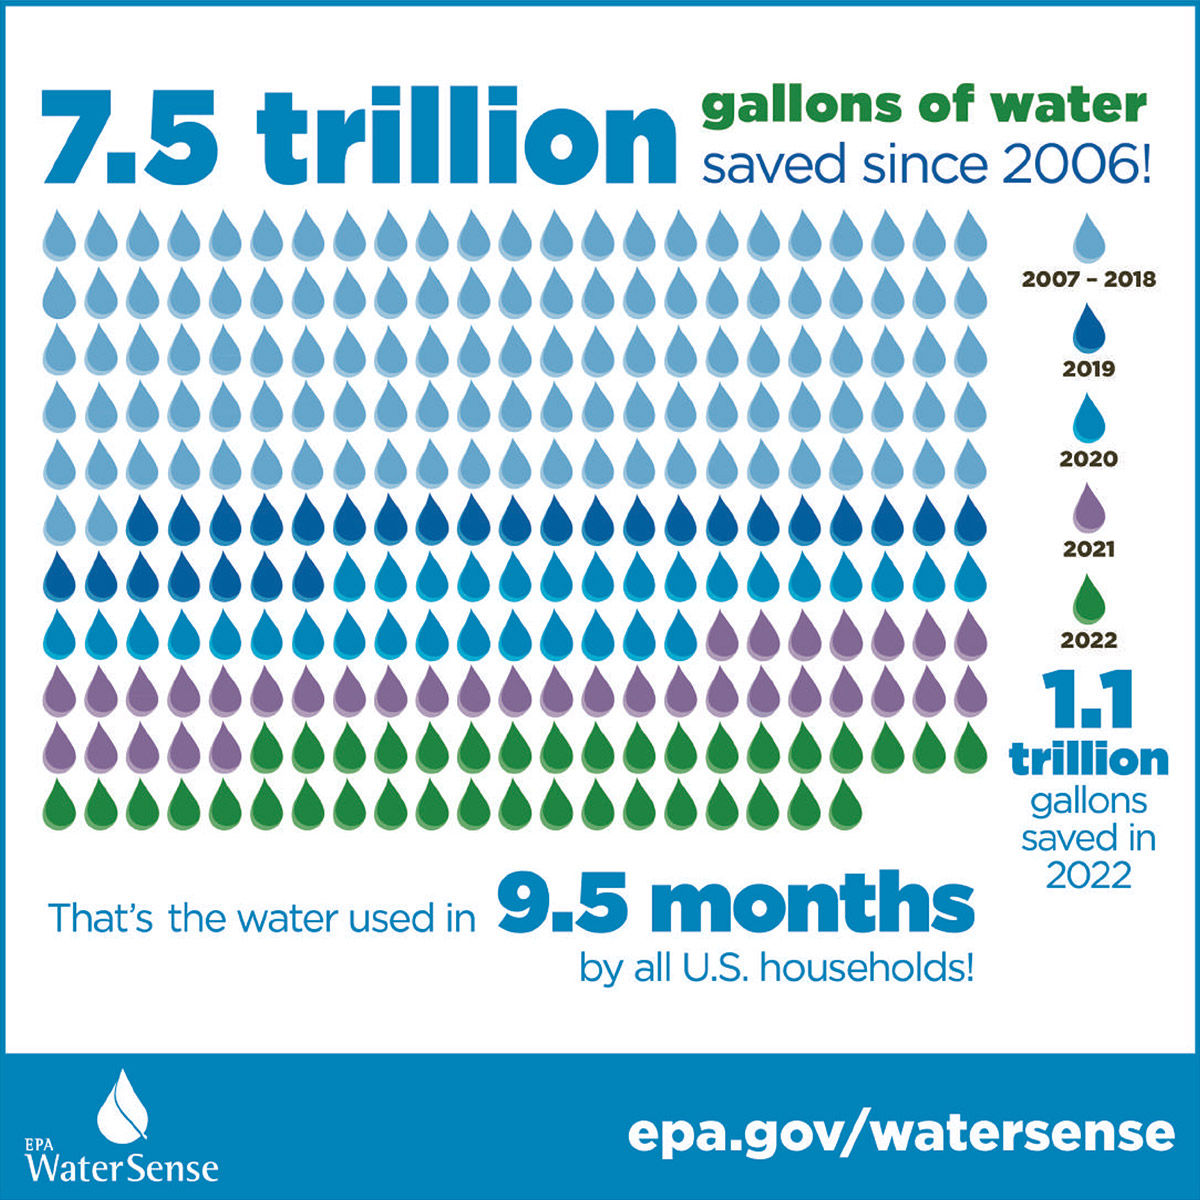 7.5 trillion gallons of water saved since 2006, 1.1 trillion gallons saved in 2022. That’s the water used in 9.5 months by all U.S. households! EPA WaterSense